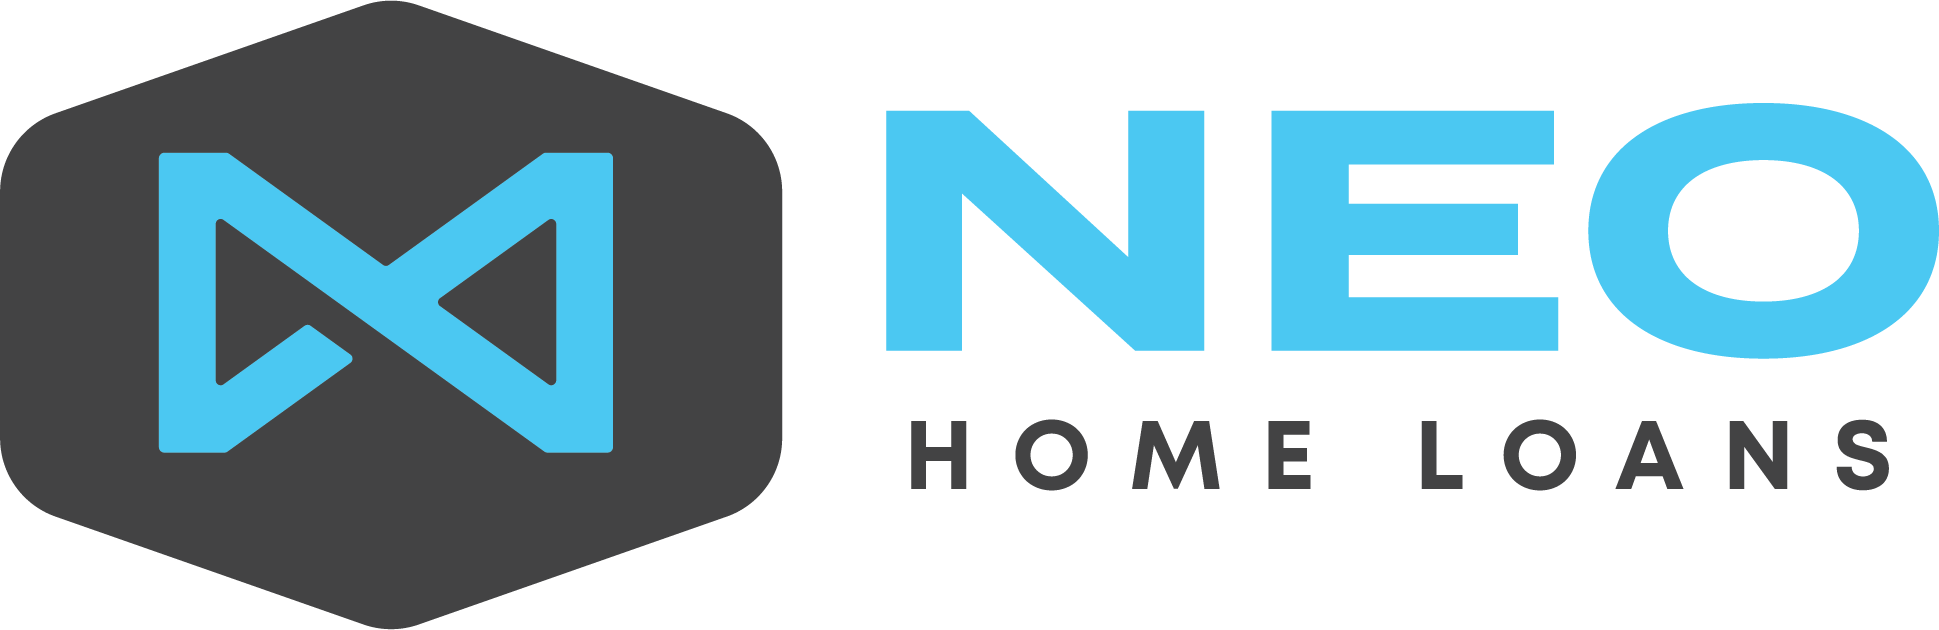 Neo home loans is one of FitBUX's mortgage lending partners